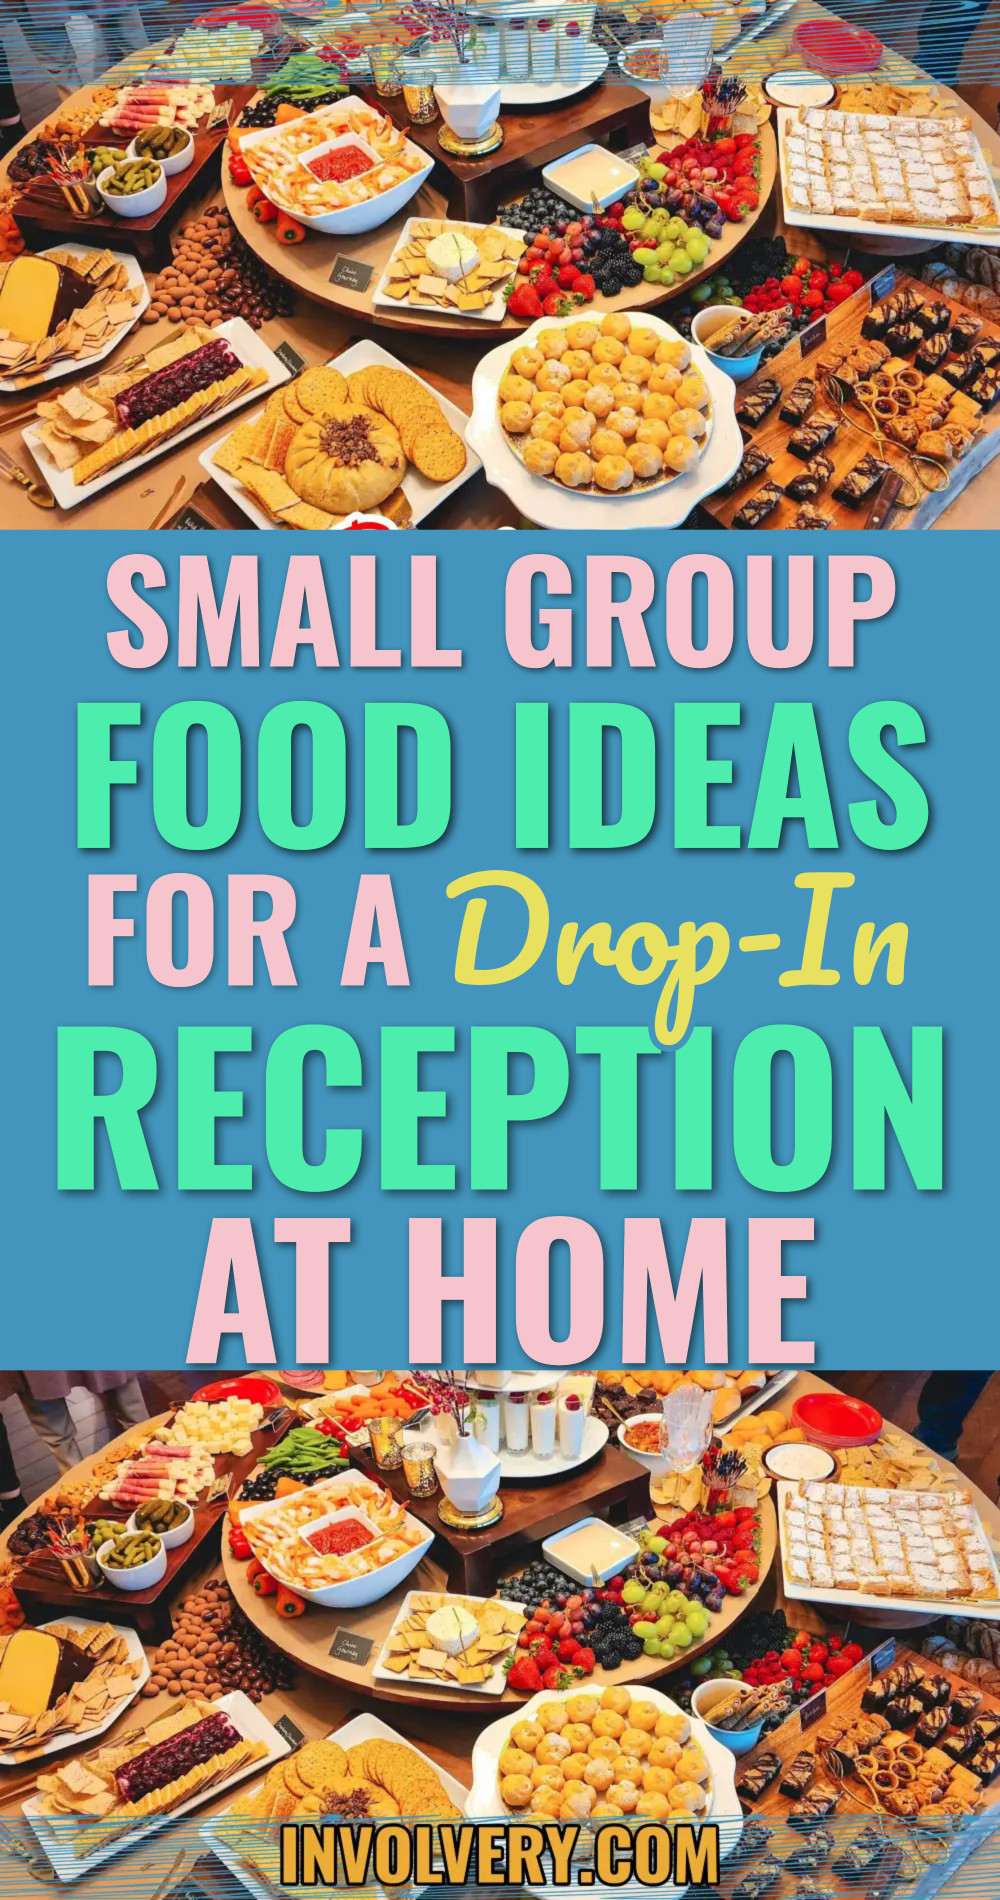 Small group food ideas for a drop-in reception at home